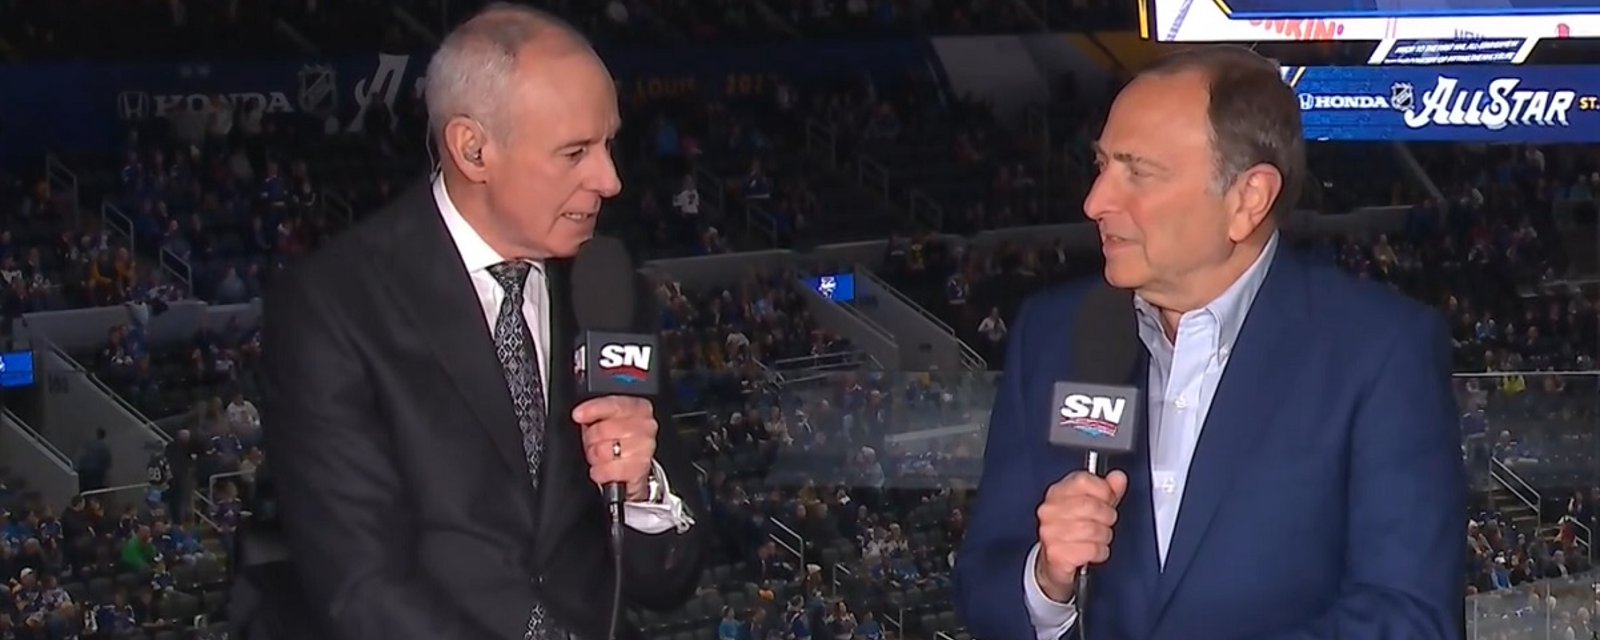 Ron MacLean &amp;amp; Gary Bettman discuss “Diversity and Inclusion” in the NHL during All Star intermission.